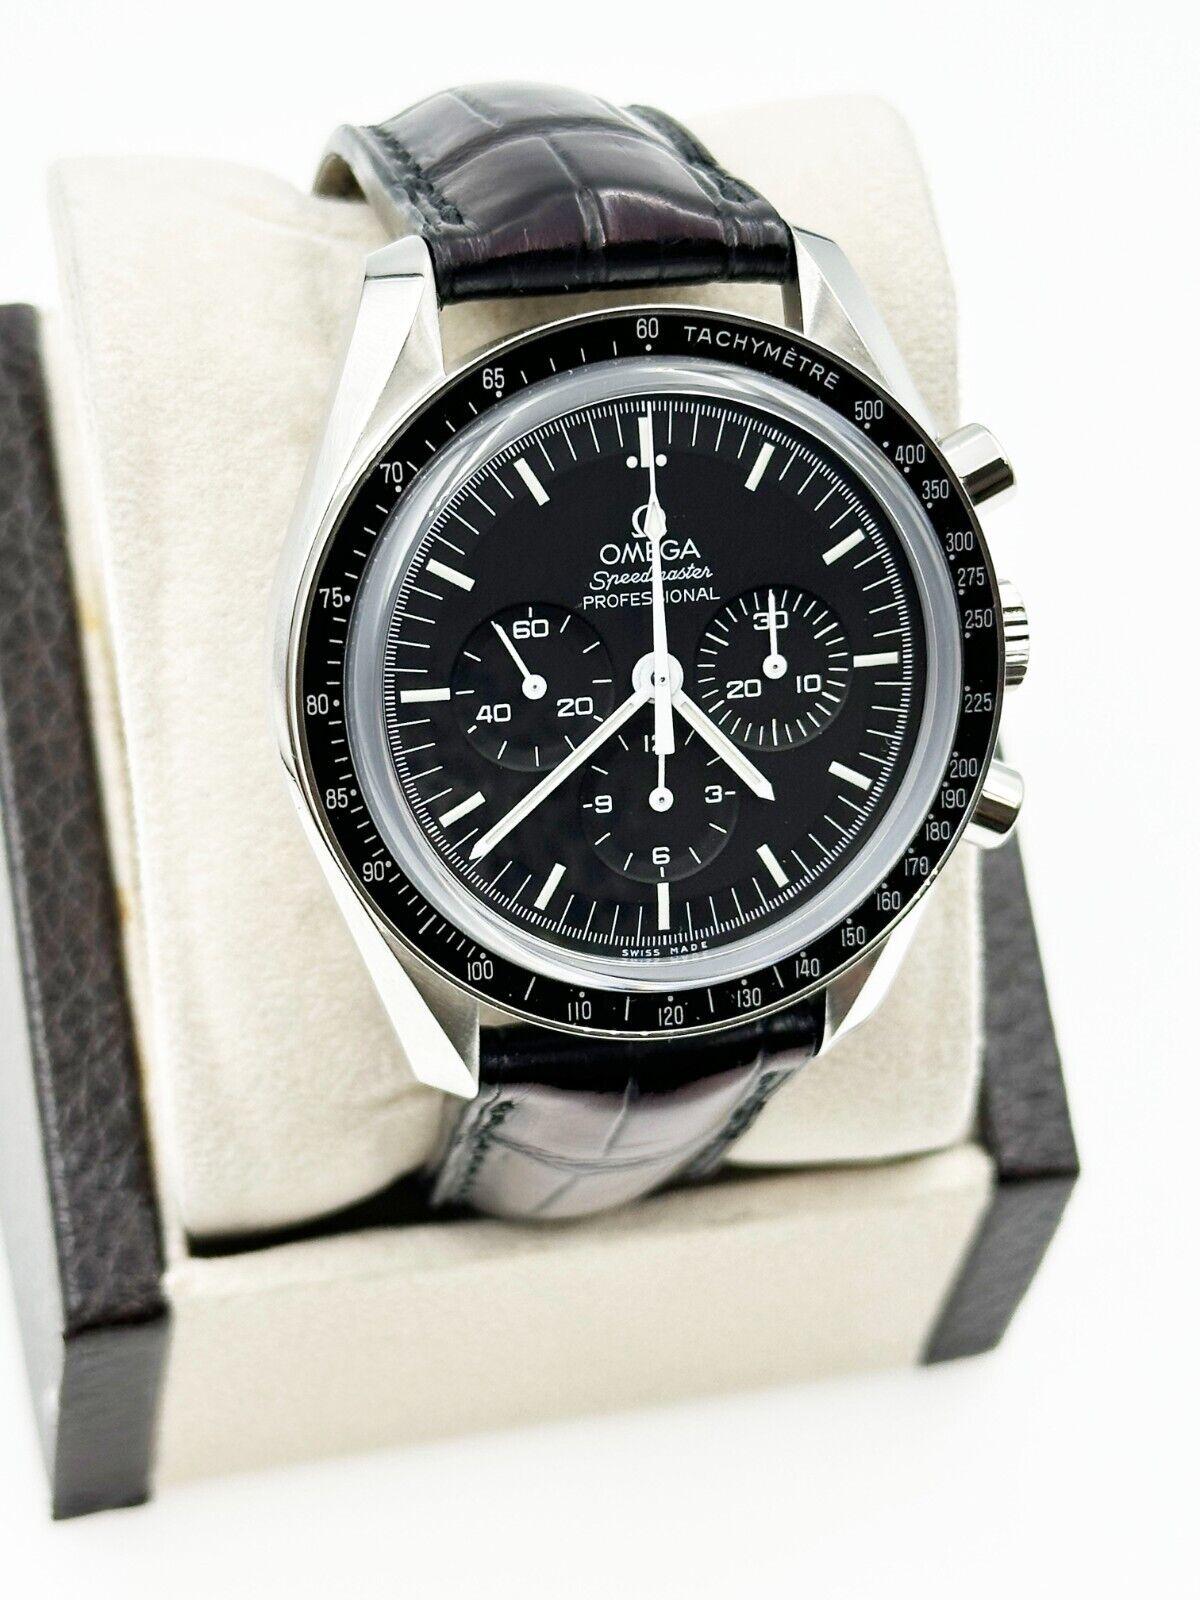 
Style Number: 311.30.42.30.01.006

 

Model: Speedmaster Moonwatch Professional

 

Case Material: Stainless Steel 

 

Band: Leather

 

Bezel:  Black

 

Dial: Black

 

Face: Sapphire Crystal 

 

Case Size: 42mm

 

Includes: 

-Omega Box &